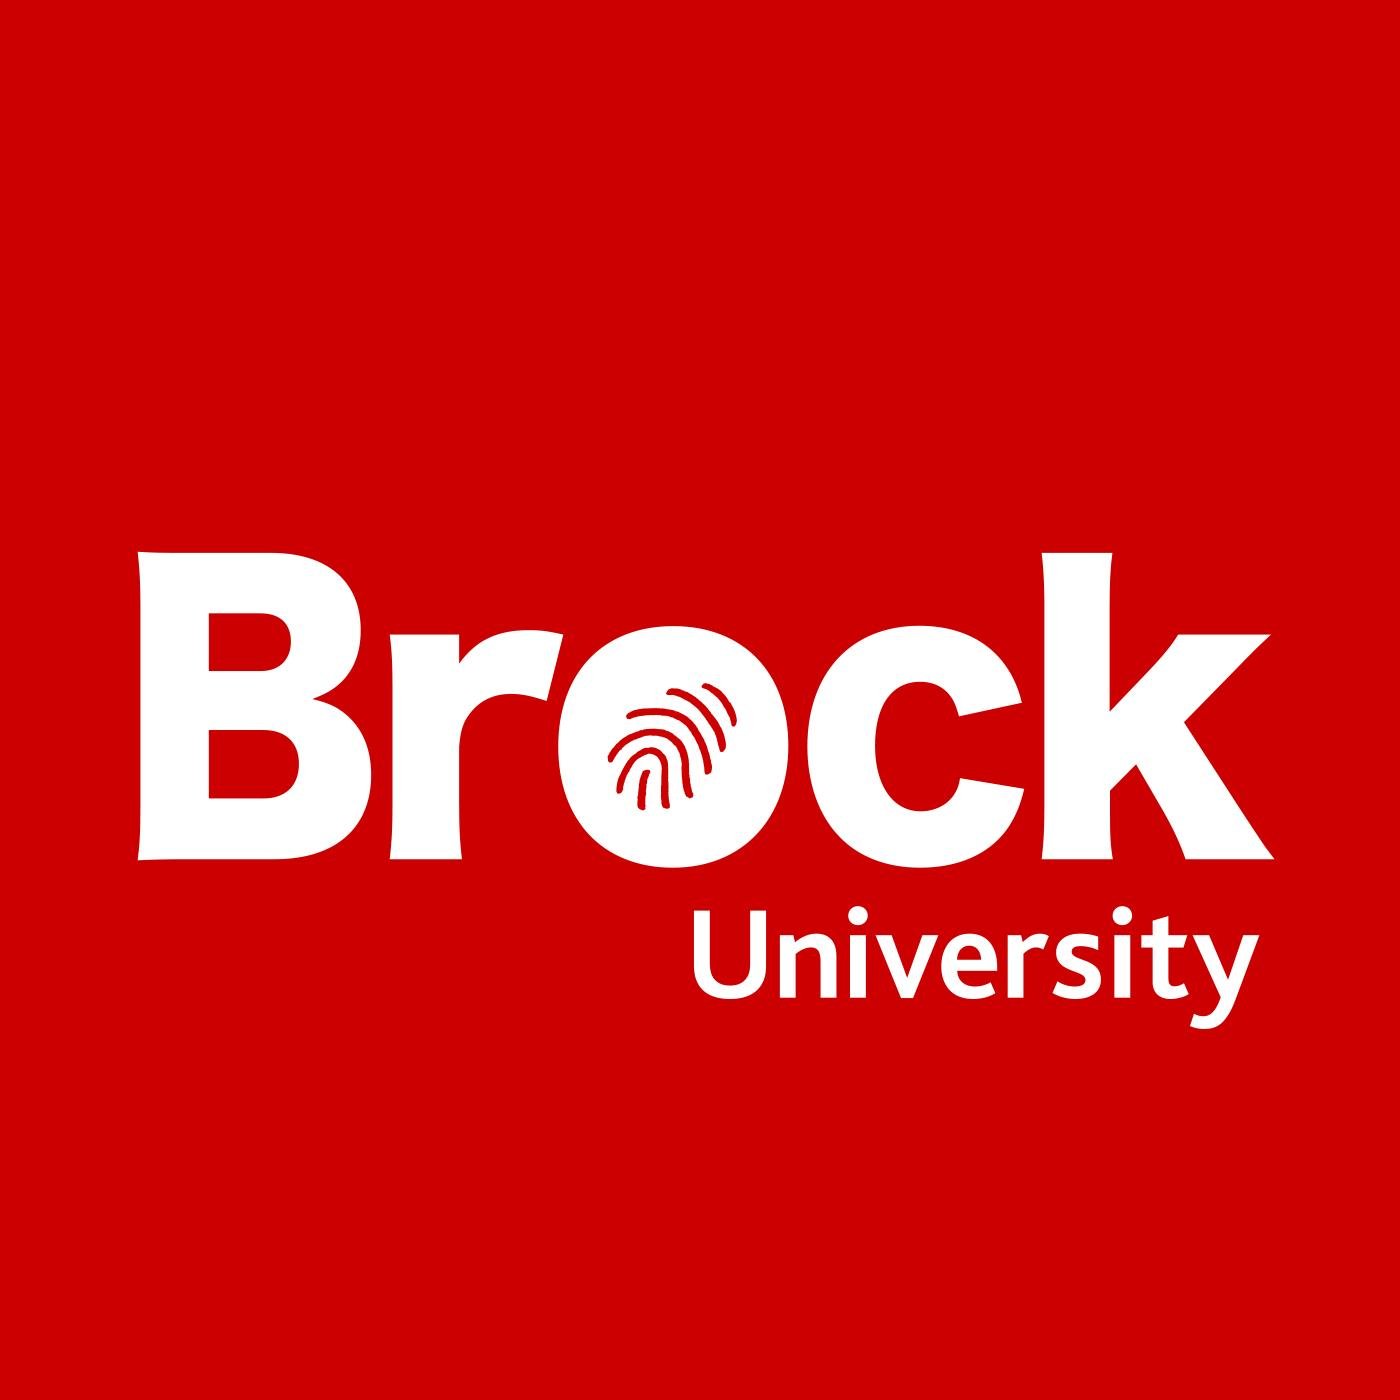 We offer graduate training in Applied Disability Studies and Applied Behaviour Analysis at Brock University, St. Catharines, Ontario, Canada. 🇨🇦